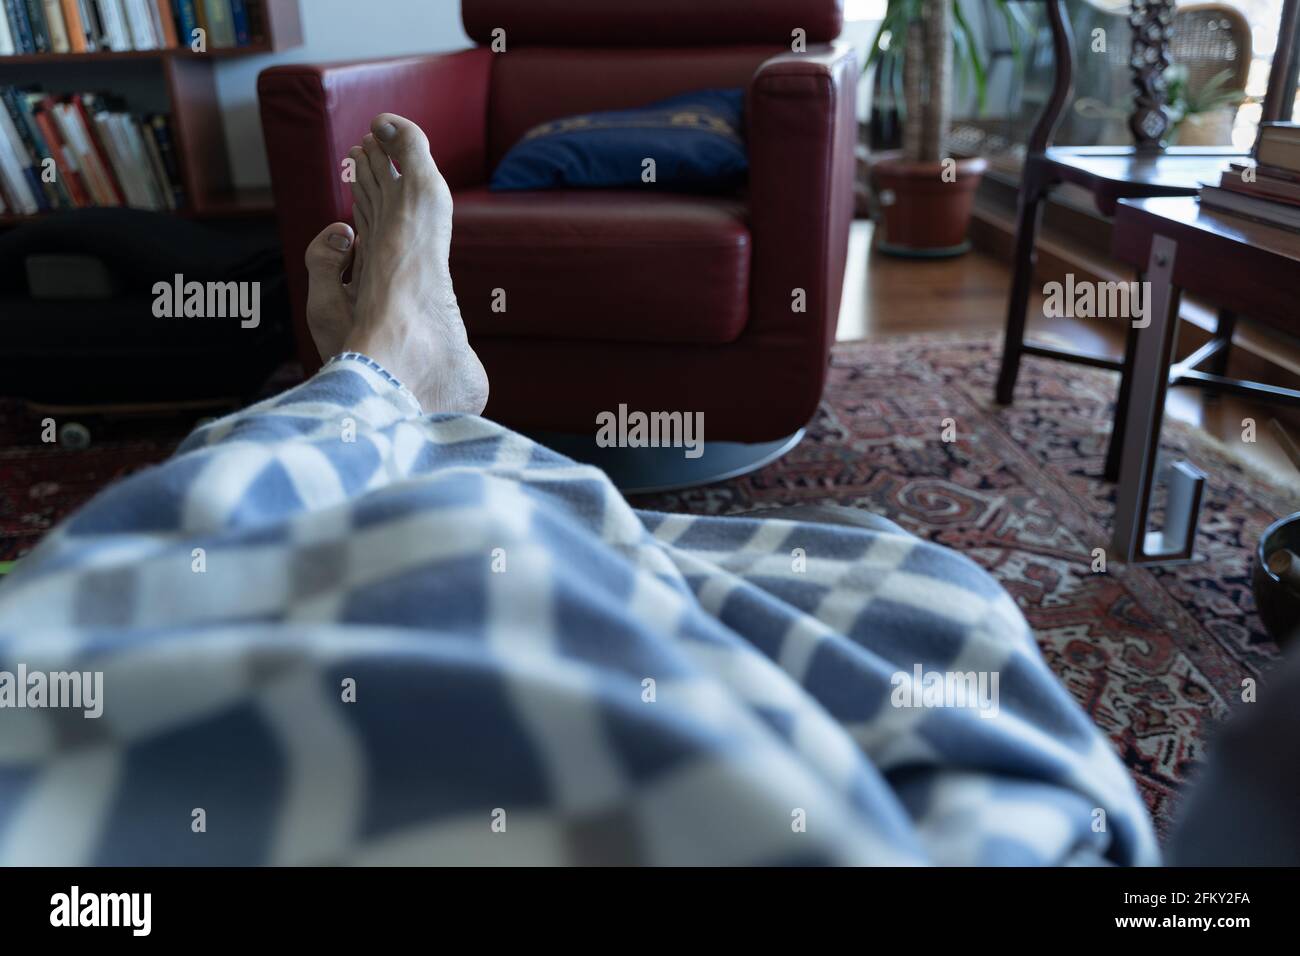 Feet of man showing over blanket resting on couch. Nap time, feeling cozy at home concepts Stock Photo